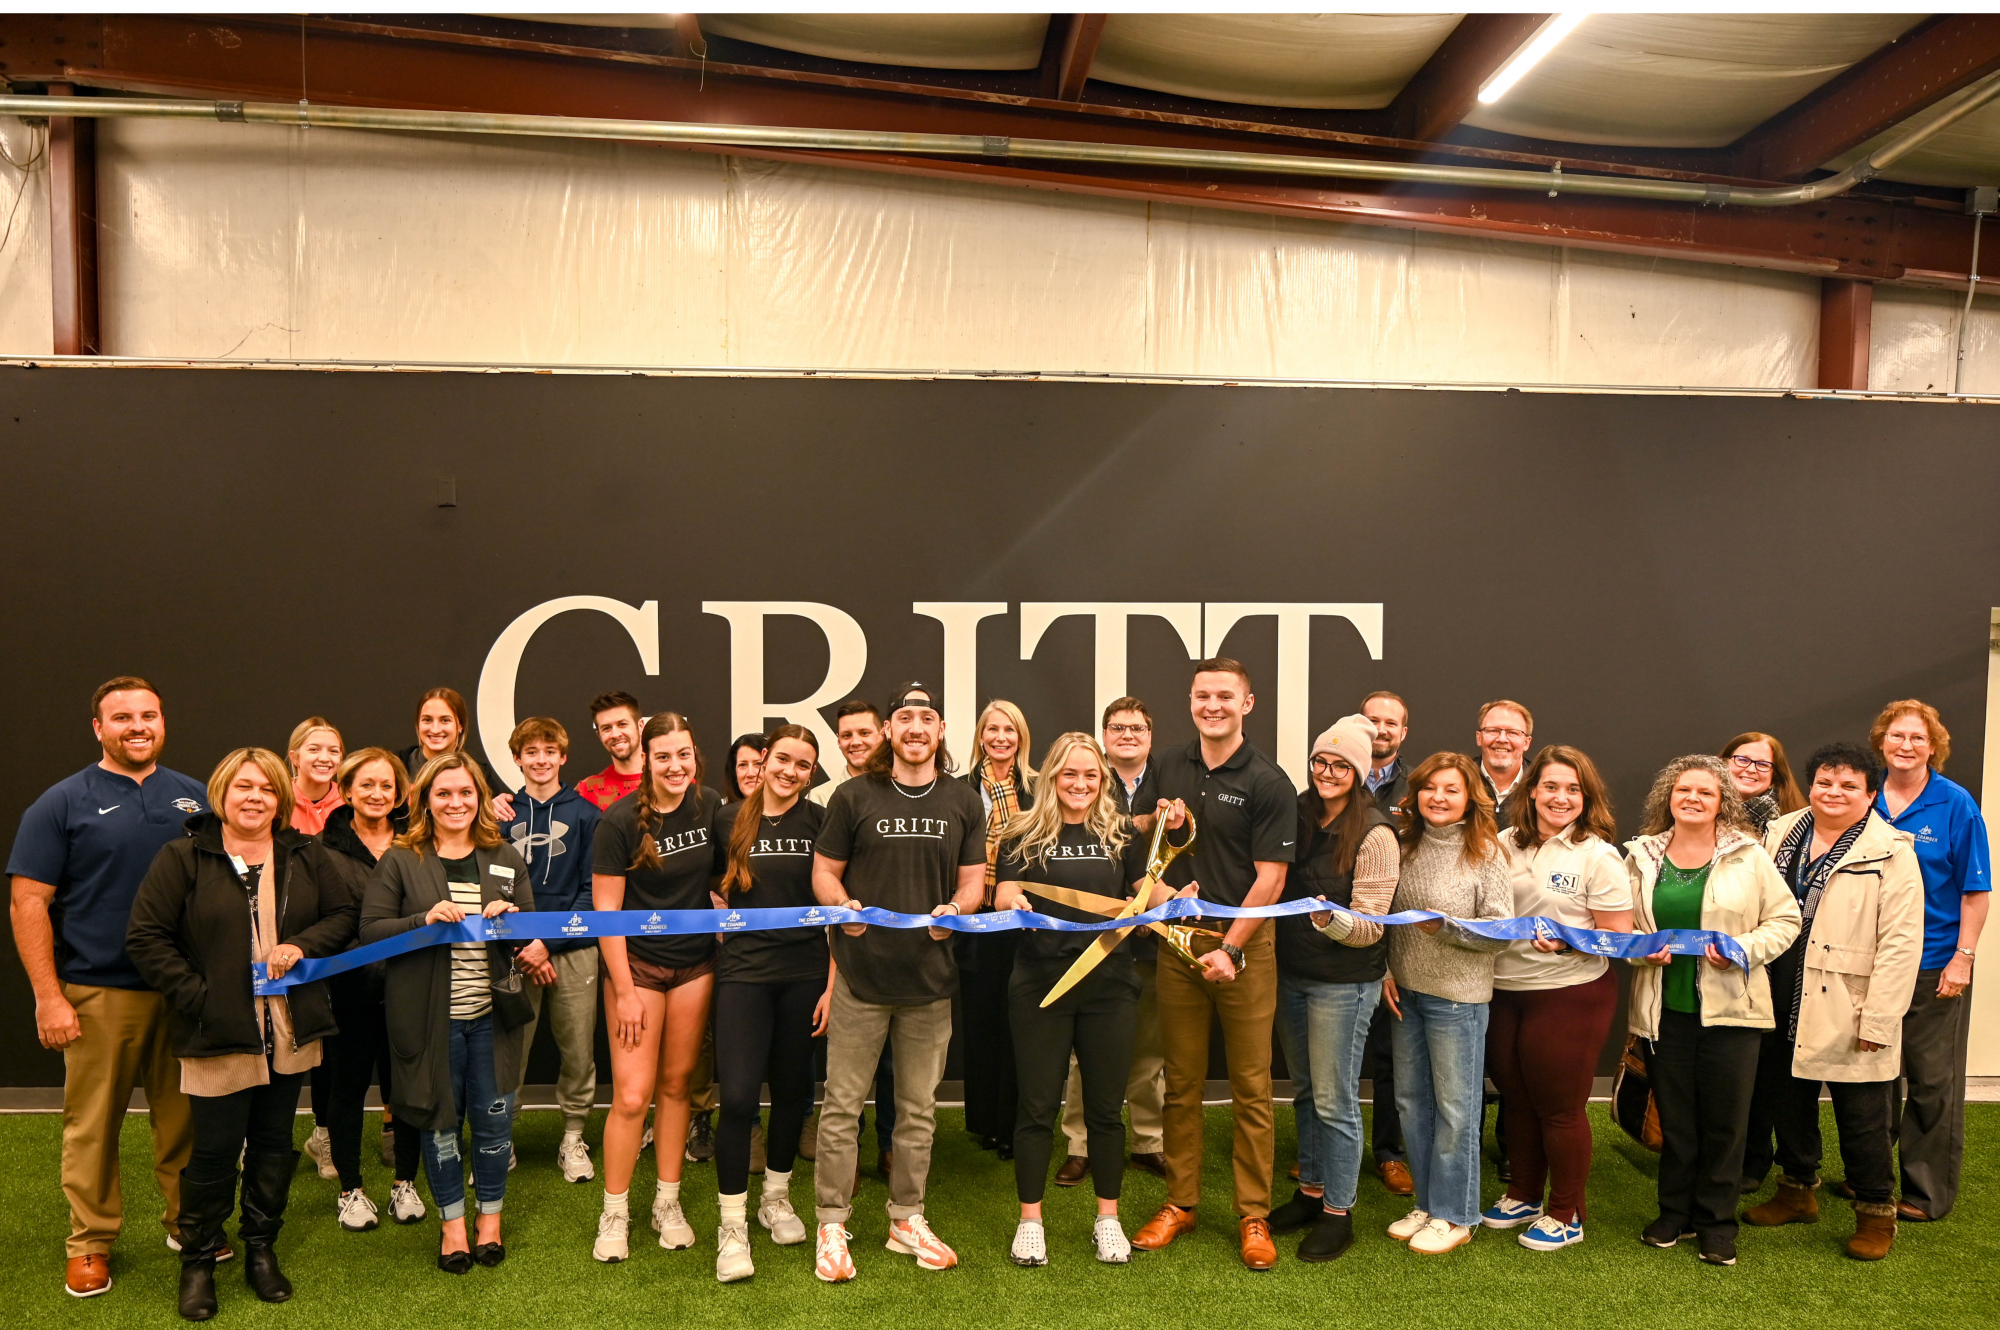 GRITT Personal Training and Fitness Opens New 24/7 Gym in Tiffin